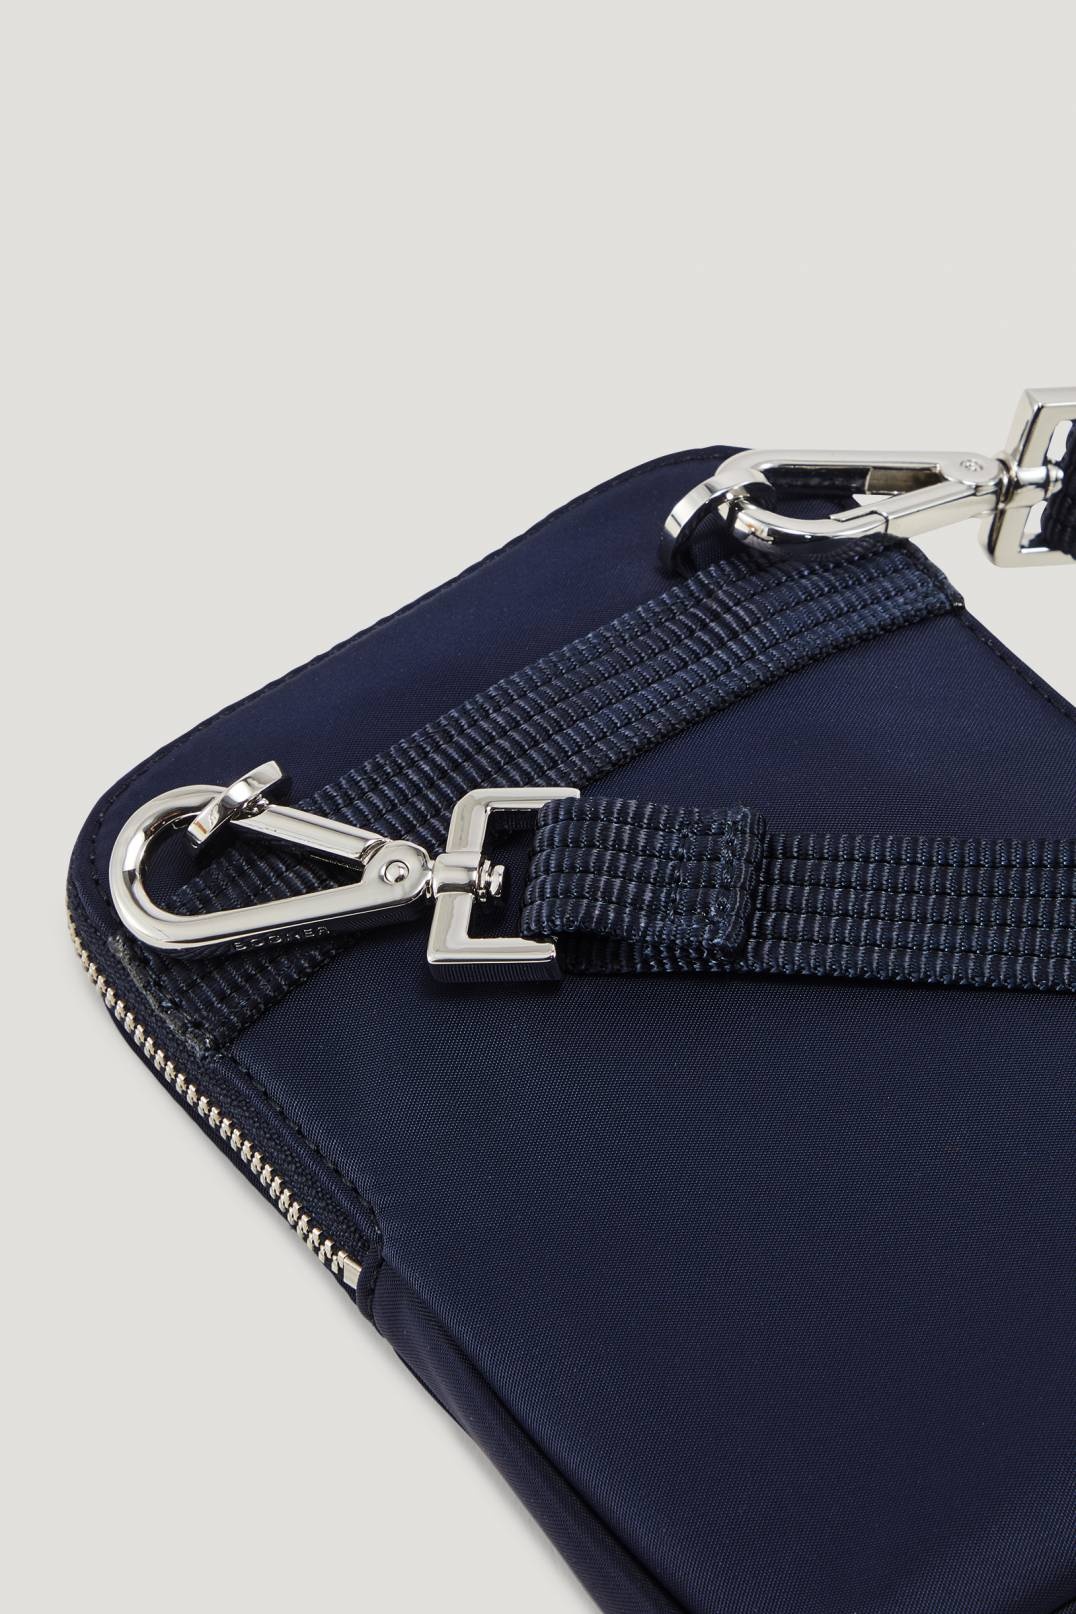 VERBIER PLAY JOHANNA SMARTPHONE POUCH IN NAVY BLUE - 5